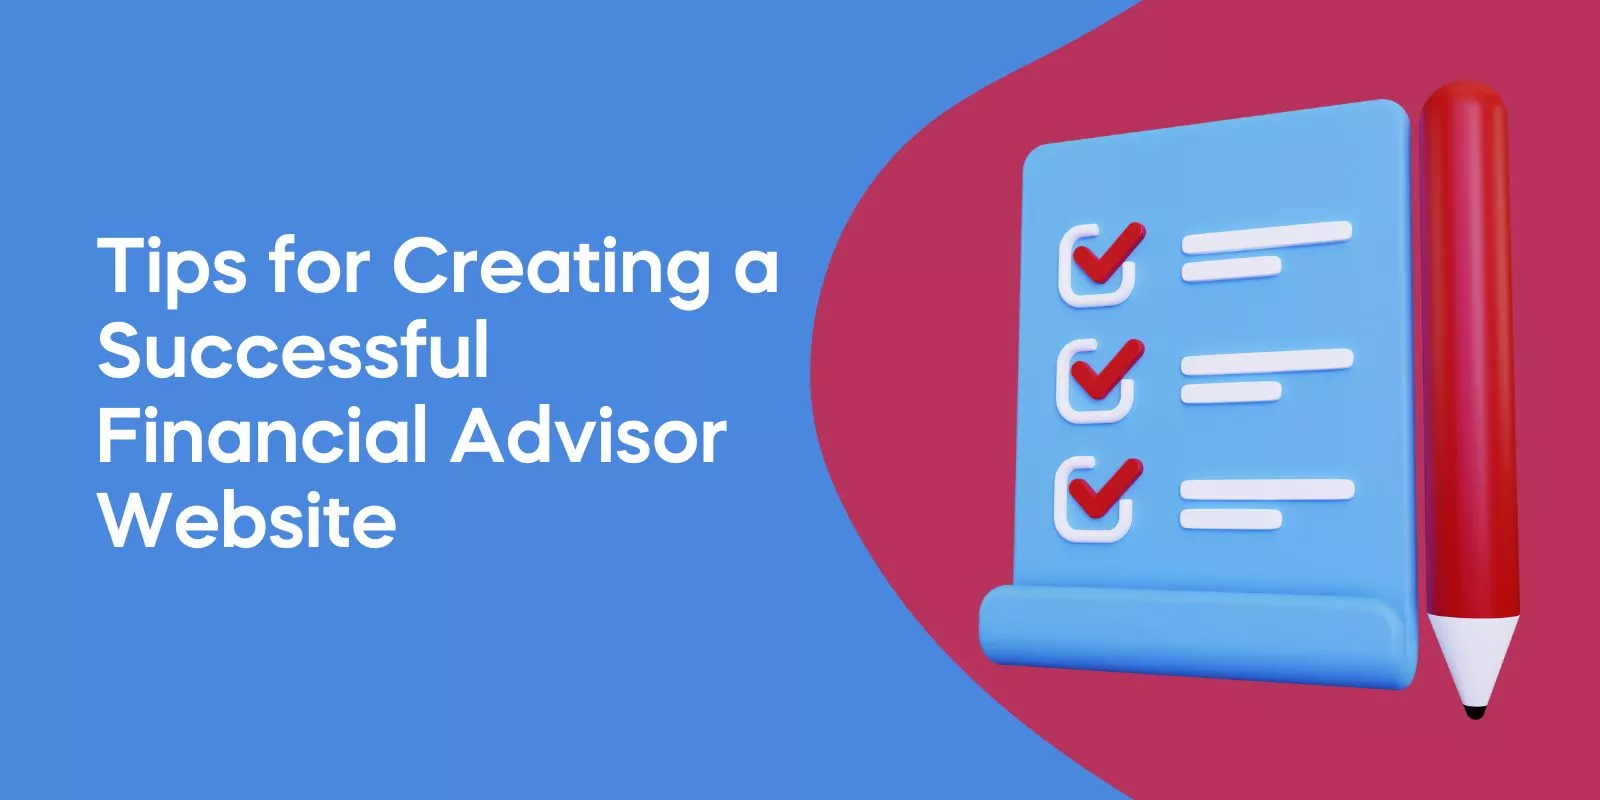 Tips for Creating a Successful Financial Advisor Website